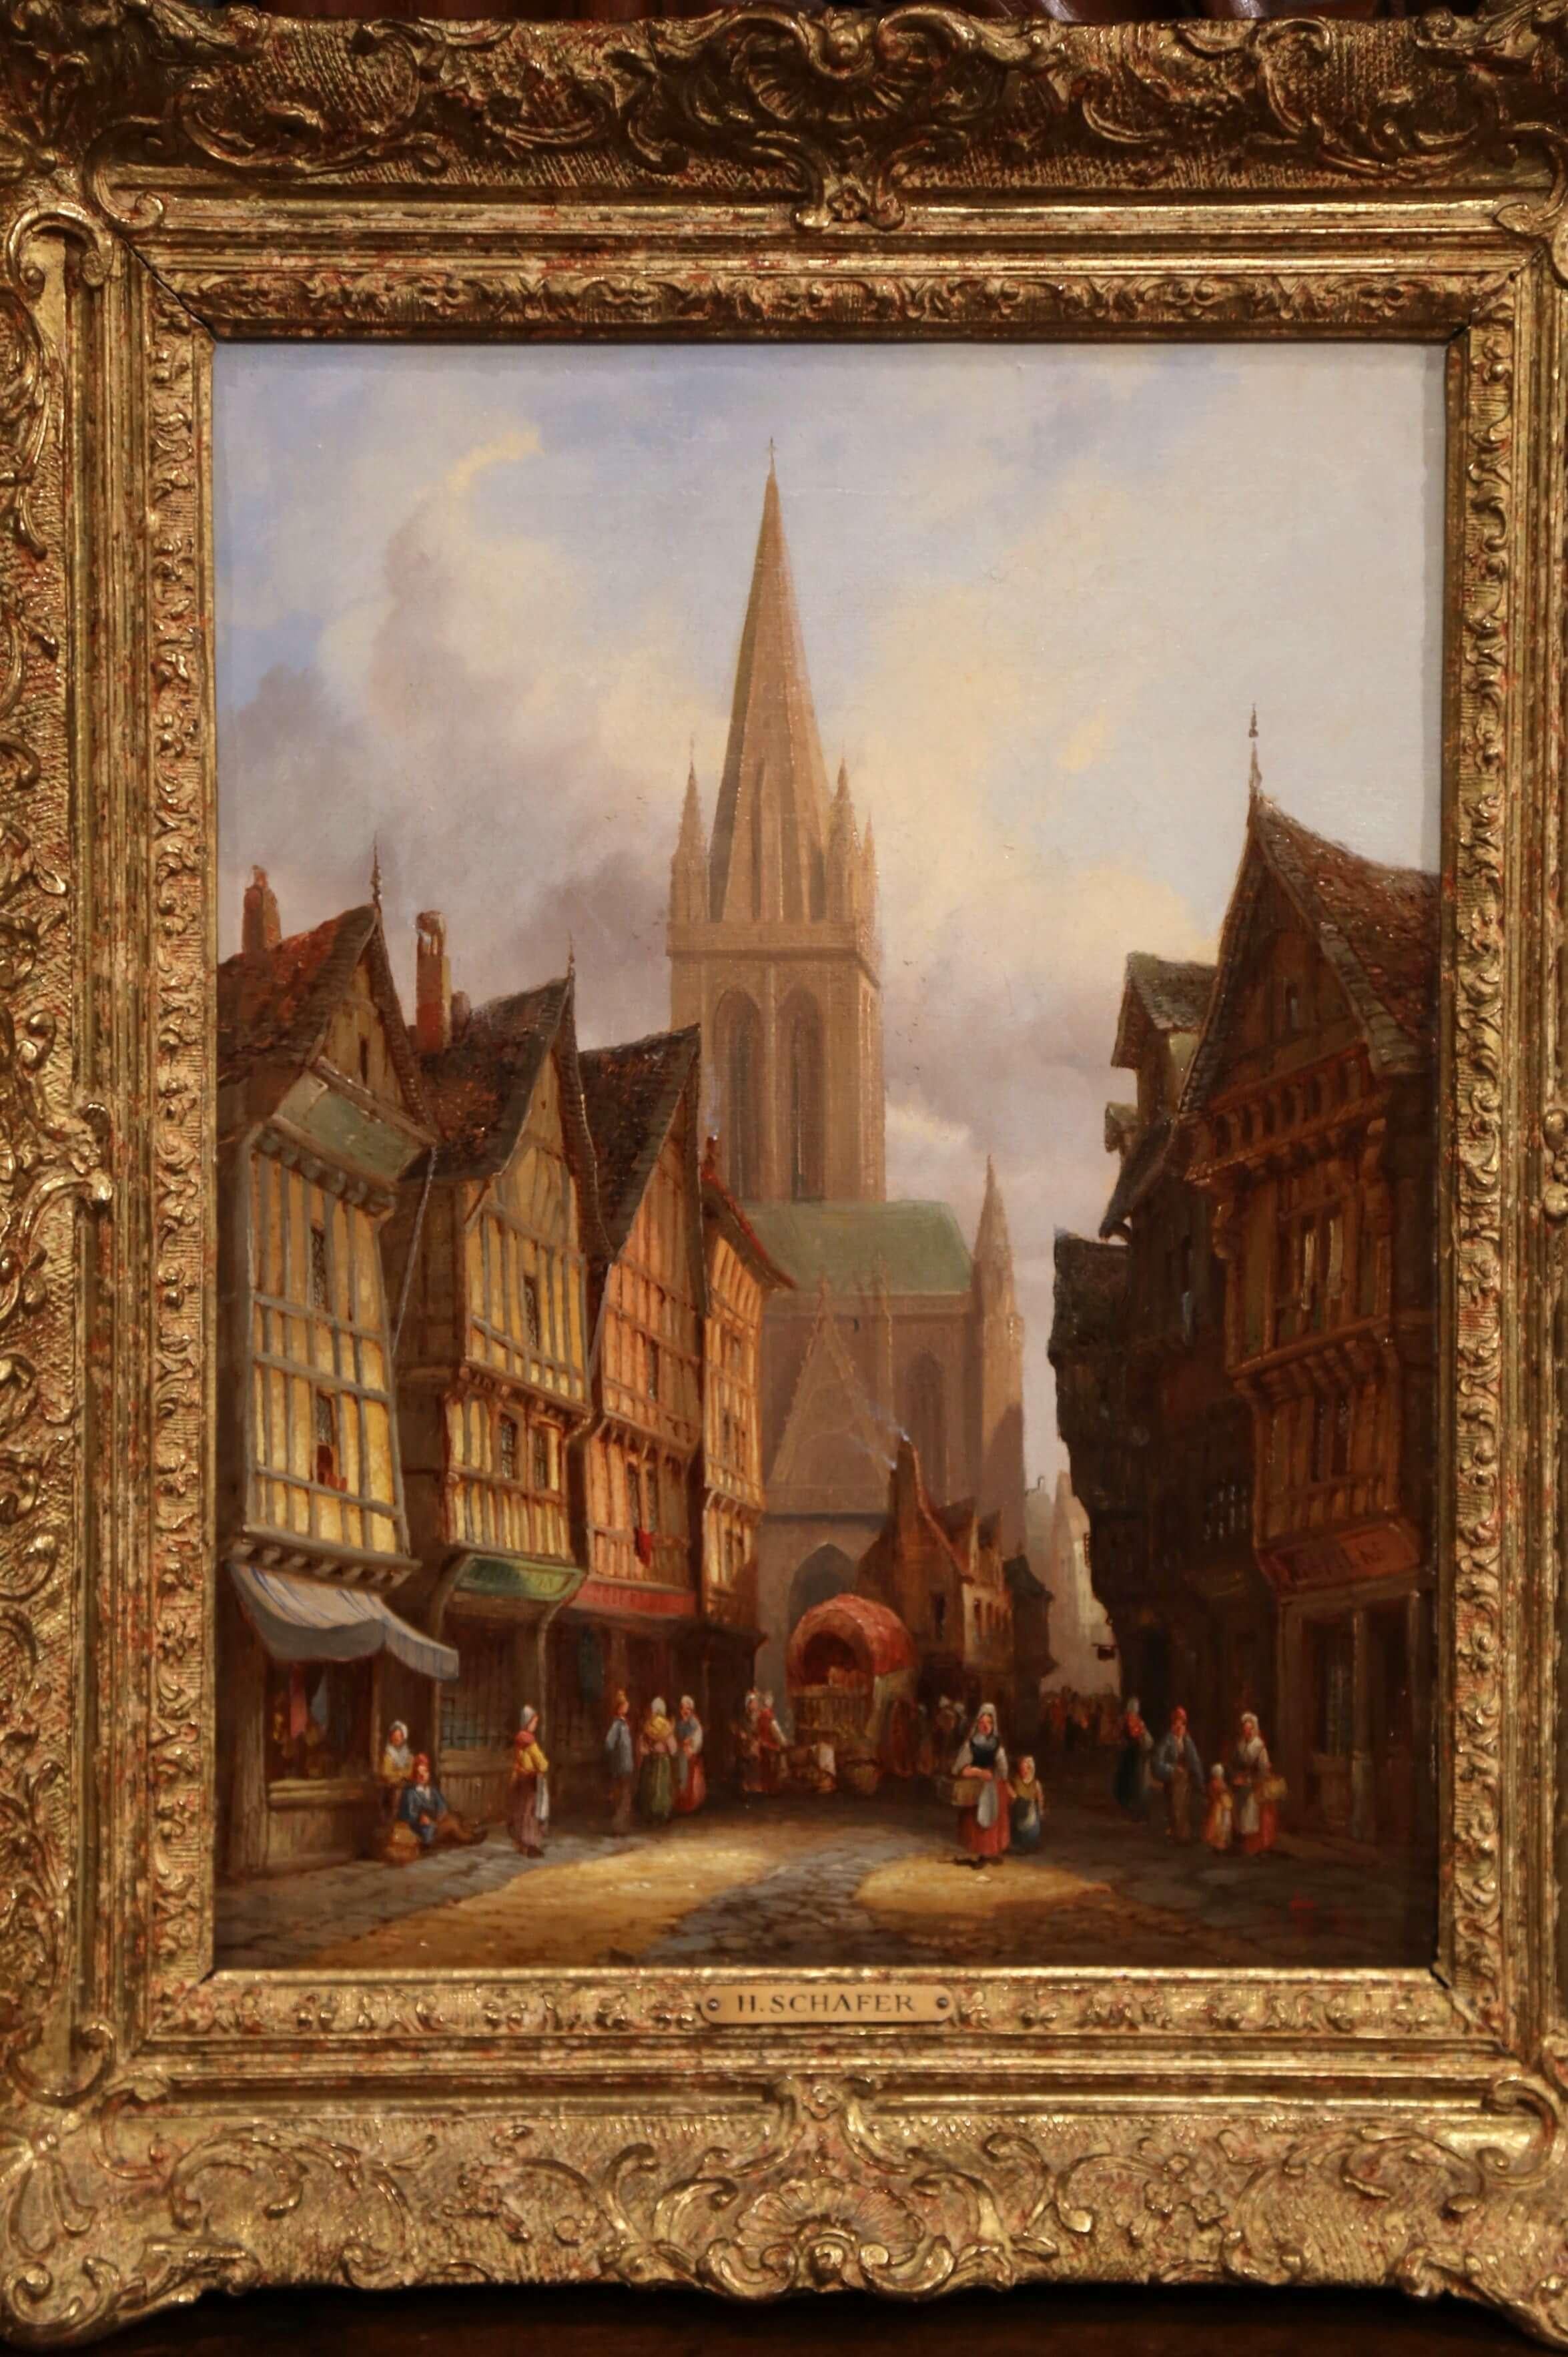 This pair of antique, rectangular oil on canvas paintings depict Classic European street scenes from the 19th century. Set in carved giltwood frames, the paintings feature a market day in Honfleur, Normandy and the other art work depicts the